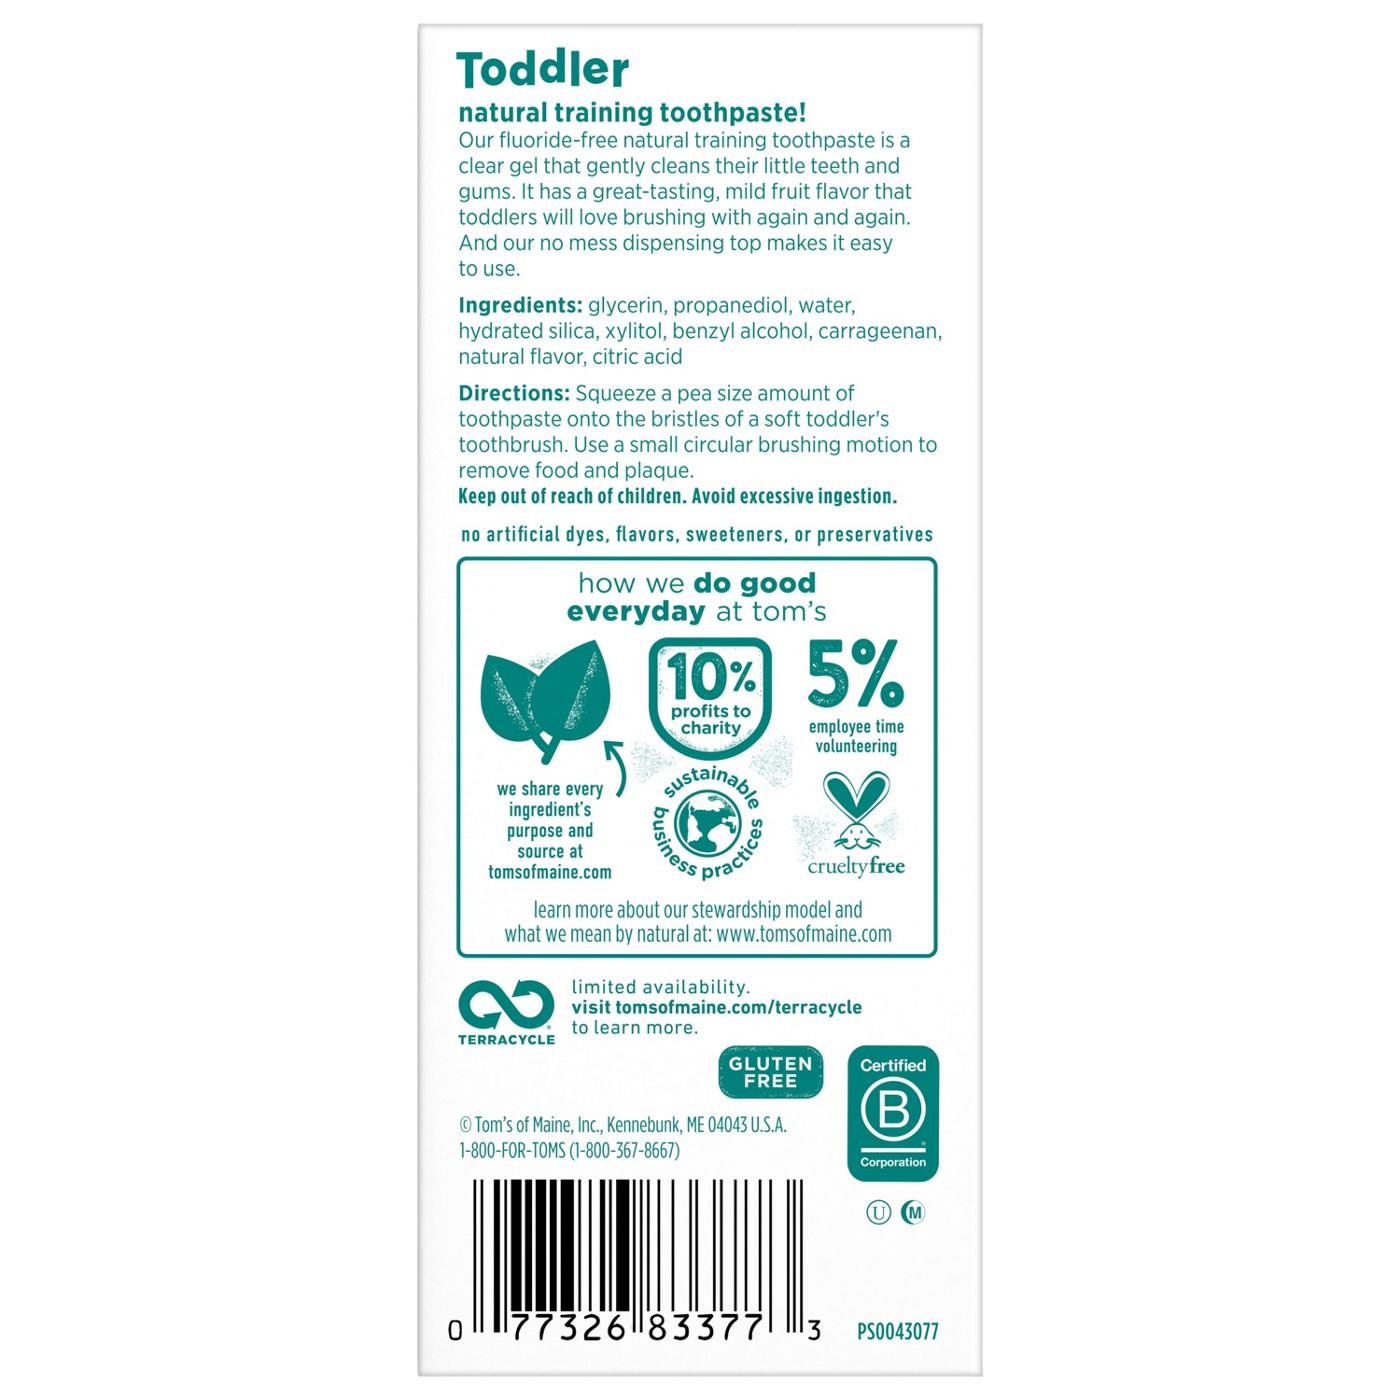 Tom's of Maine Toddler Fluoride - Free Training Toothpaste; image 5 of 8